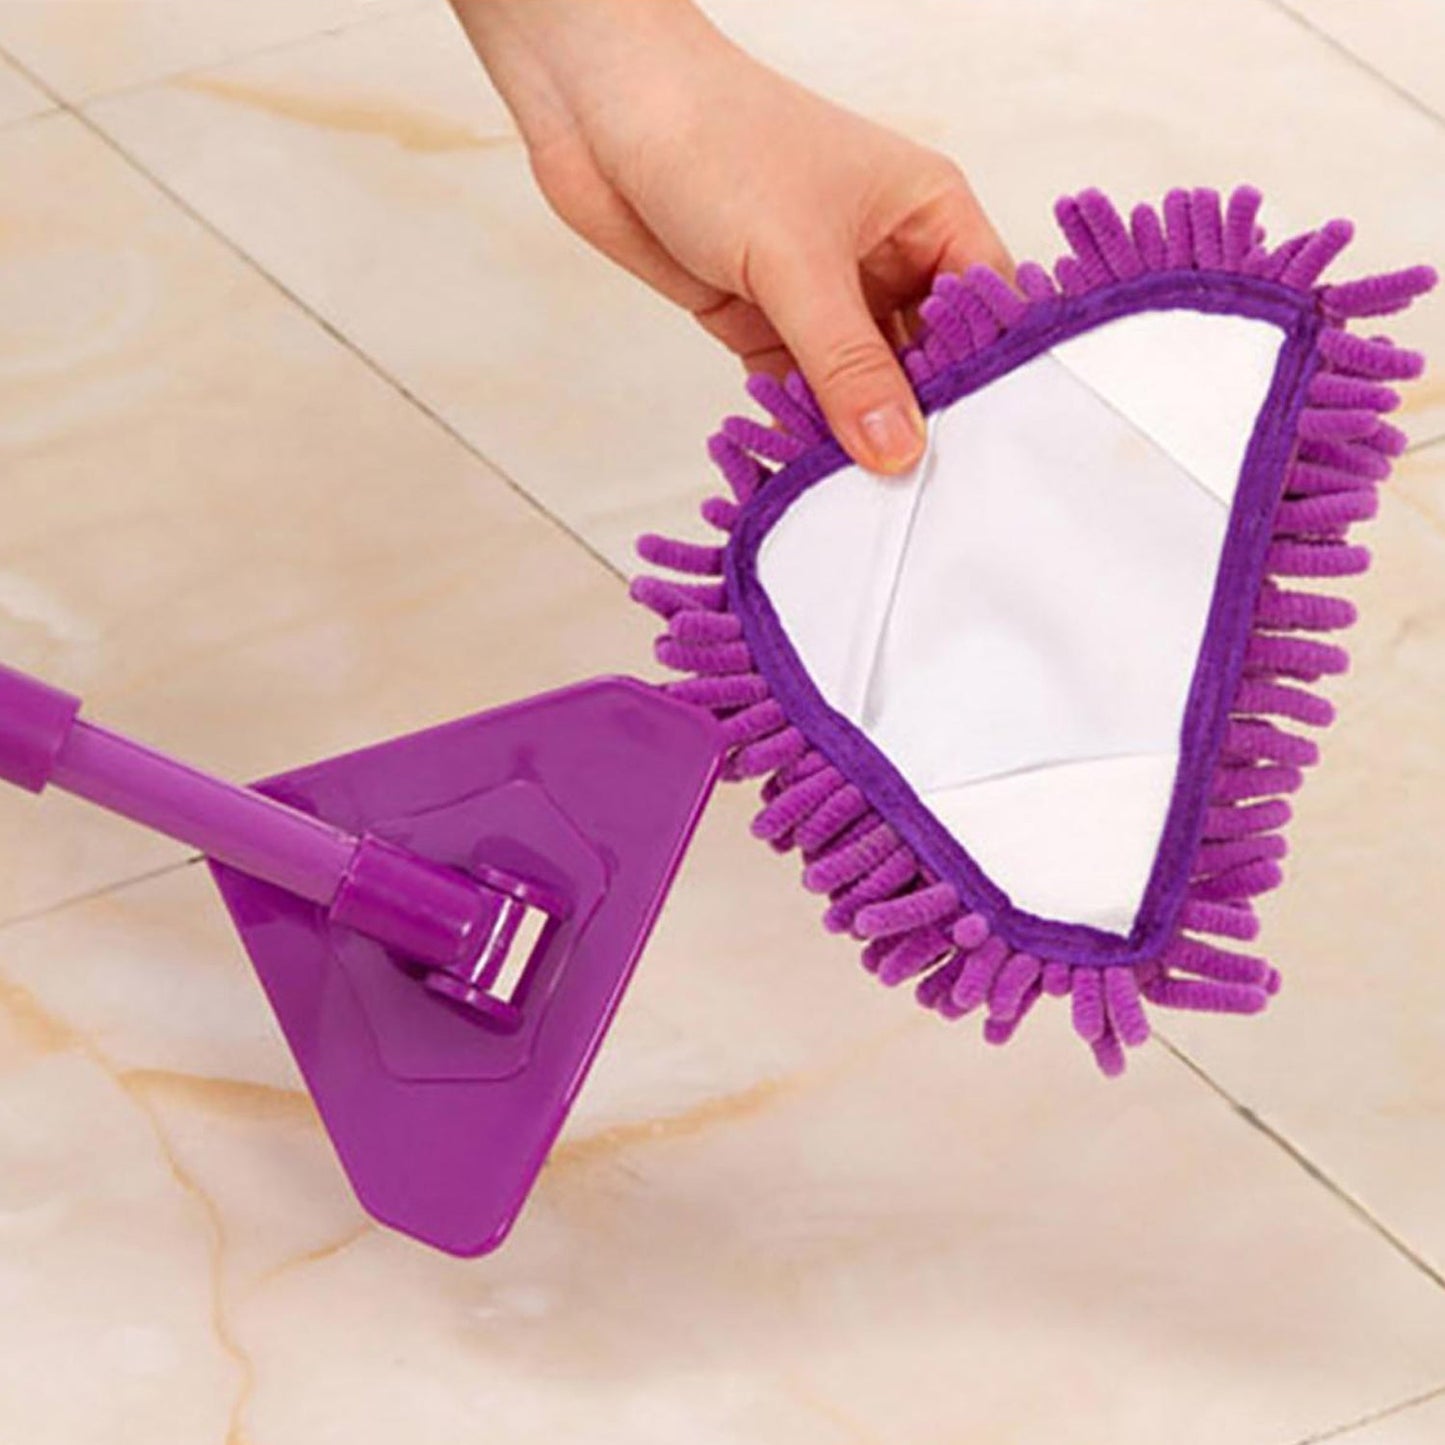 SS Road Adjustable Triangle Mop for Cleaning Dusty and Wet Floor Surfaces